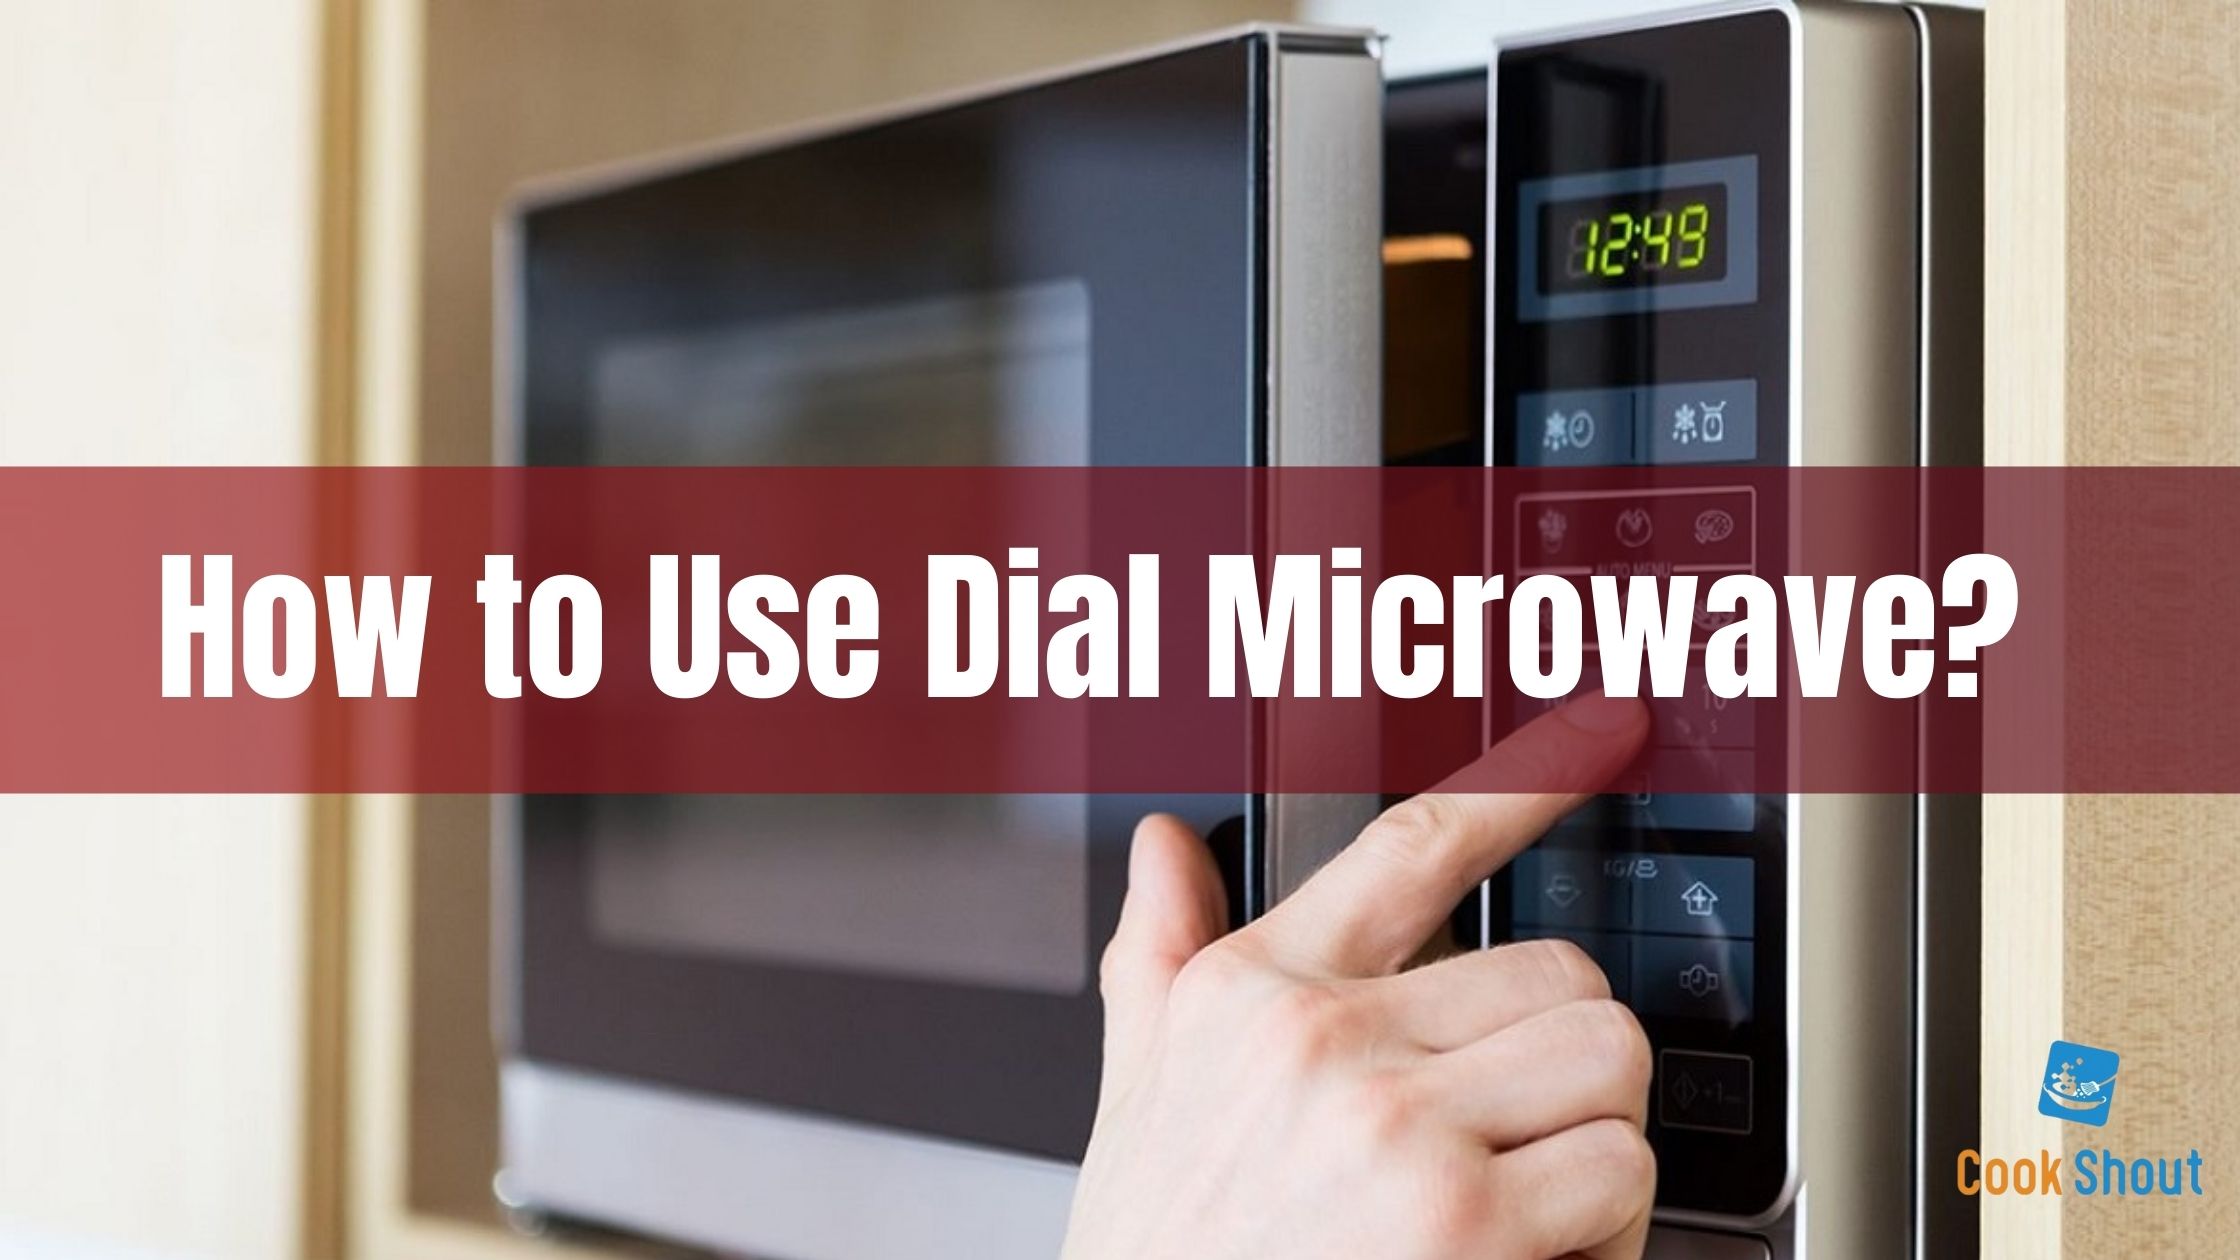 How to Use Dial Microwave